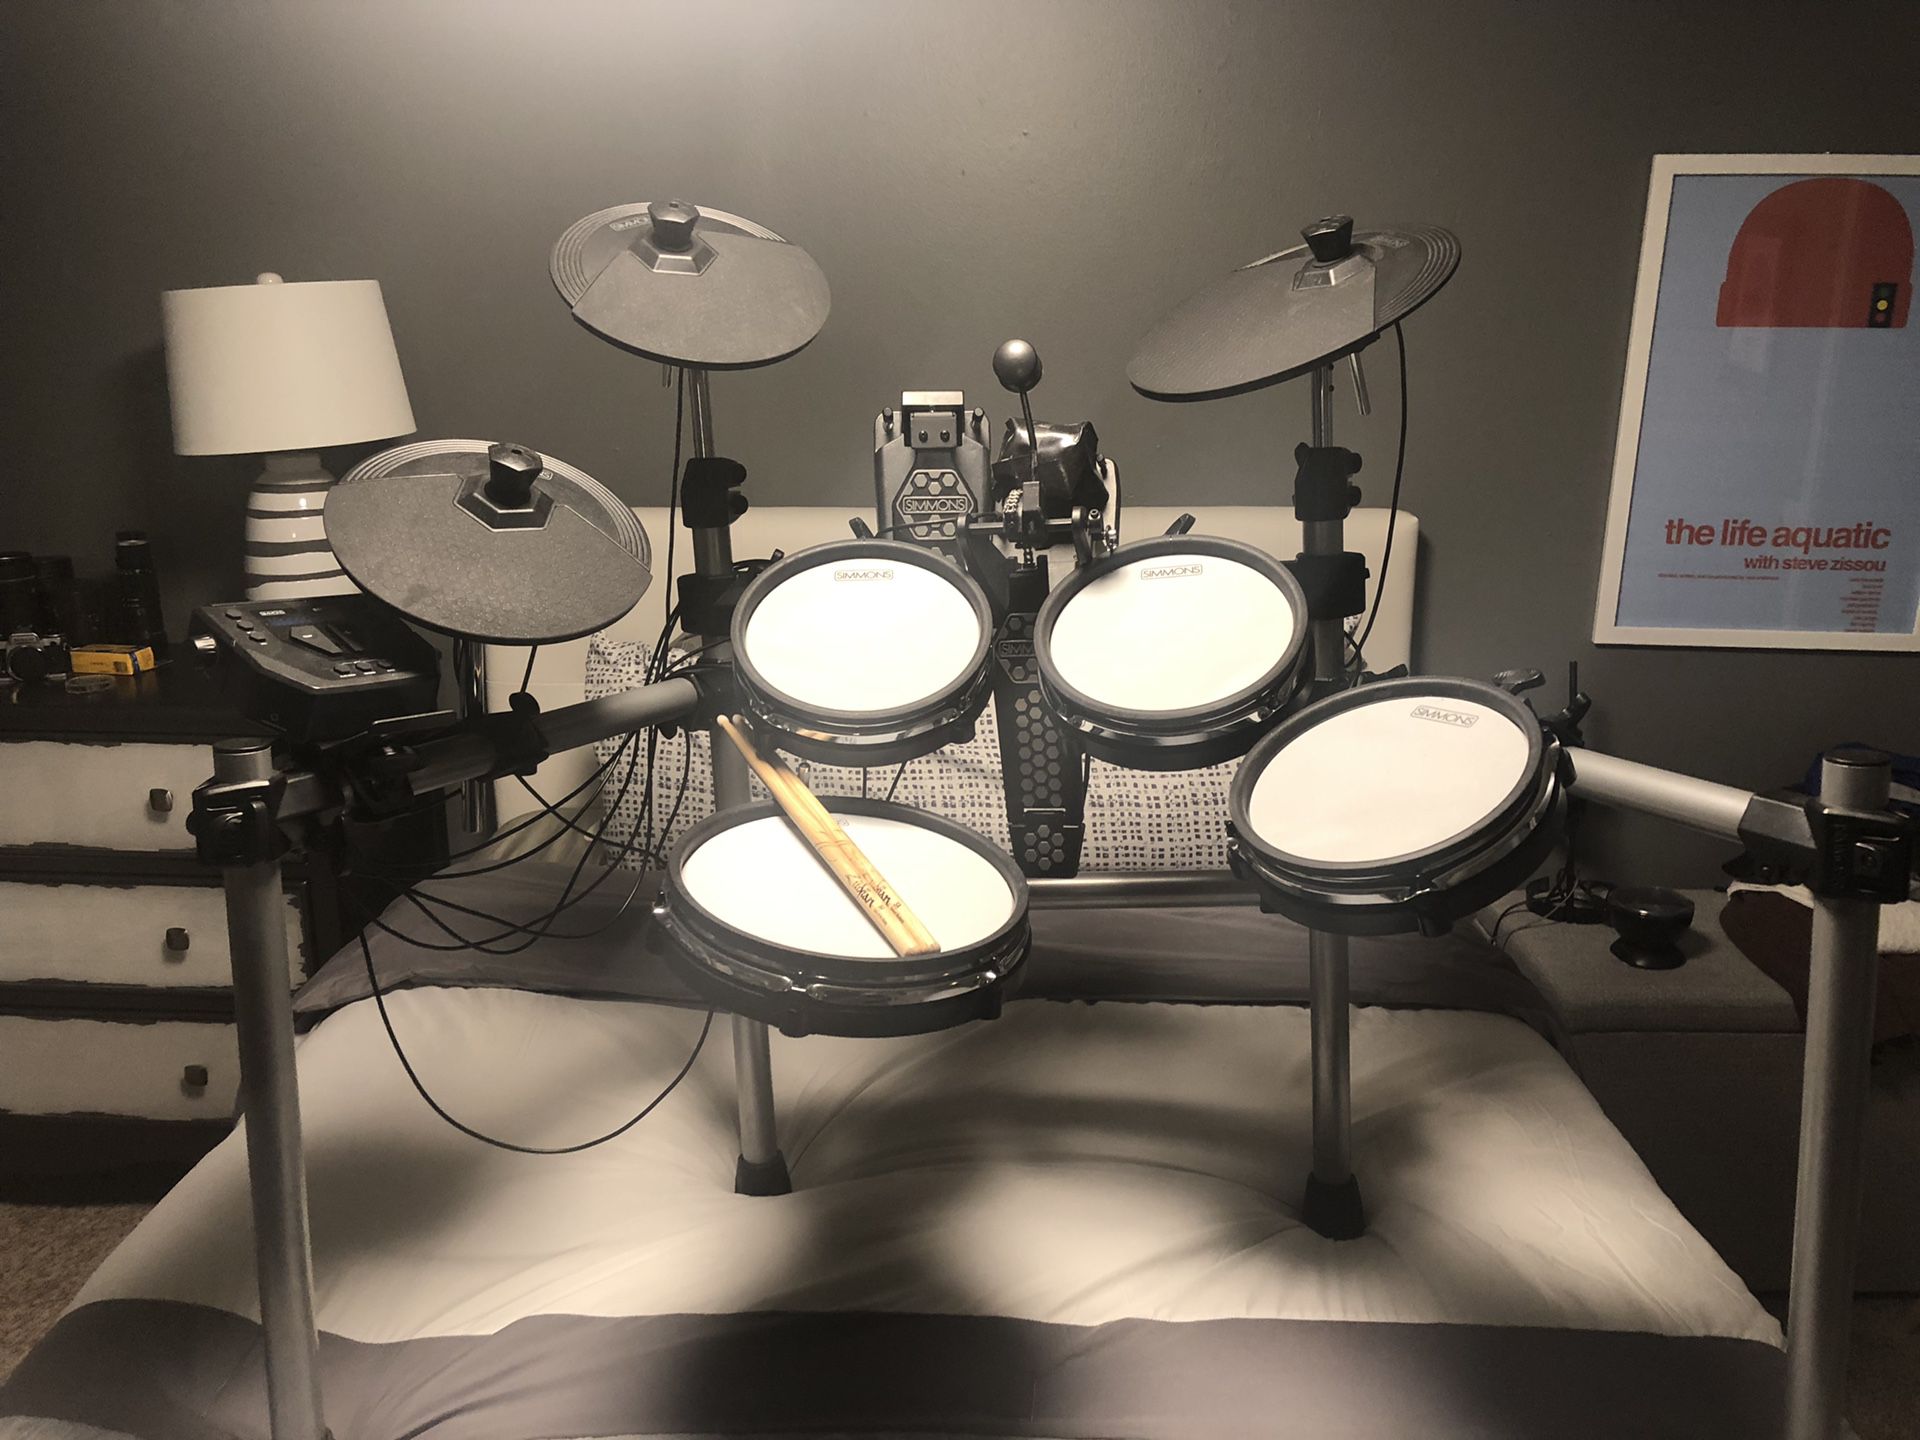 Simmons ssd550 electronic drum set